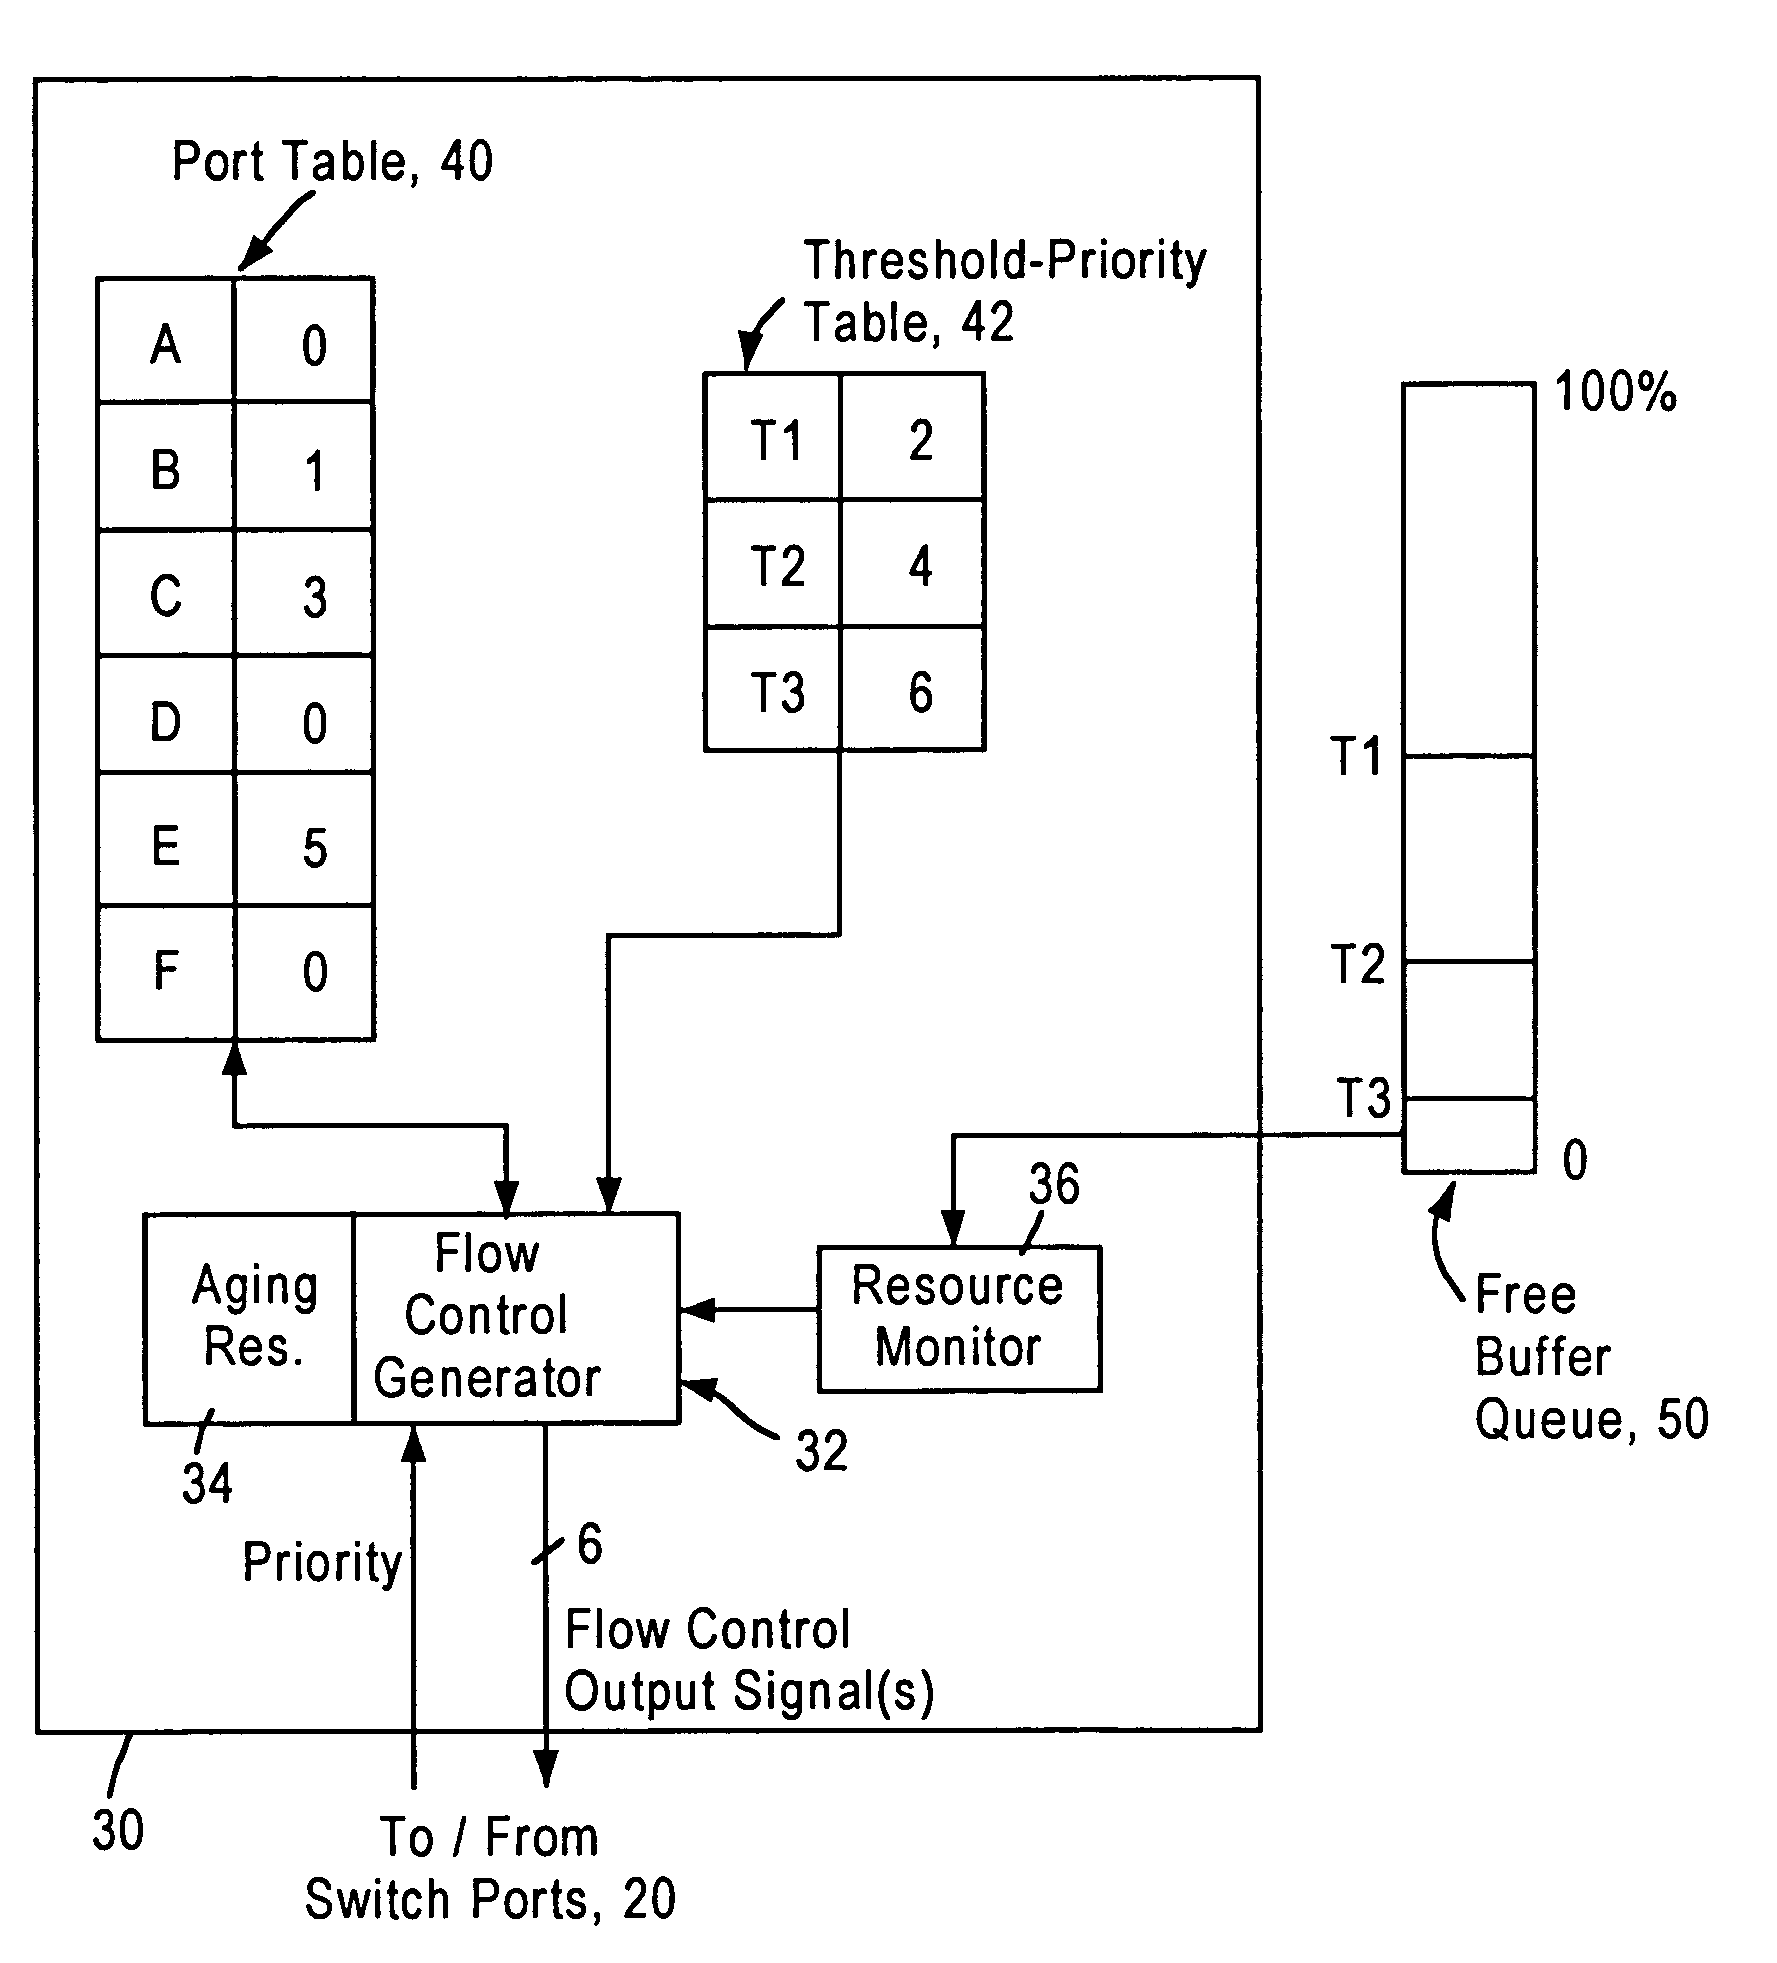 Flow control arrangement in a network switch based on priority traffic